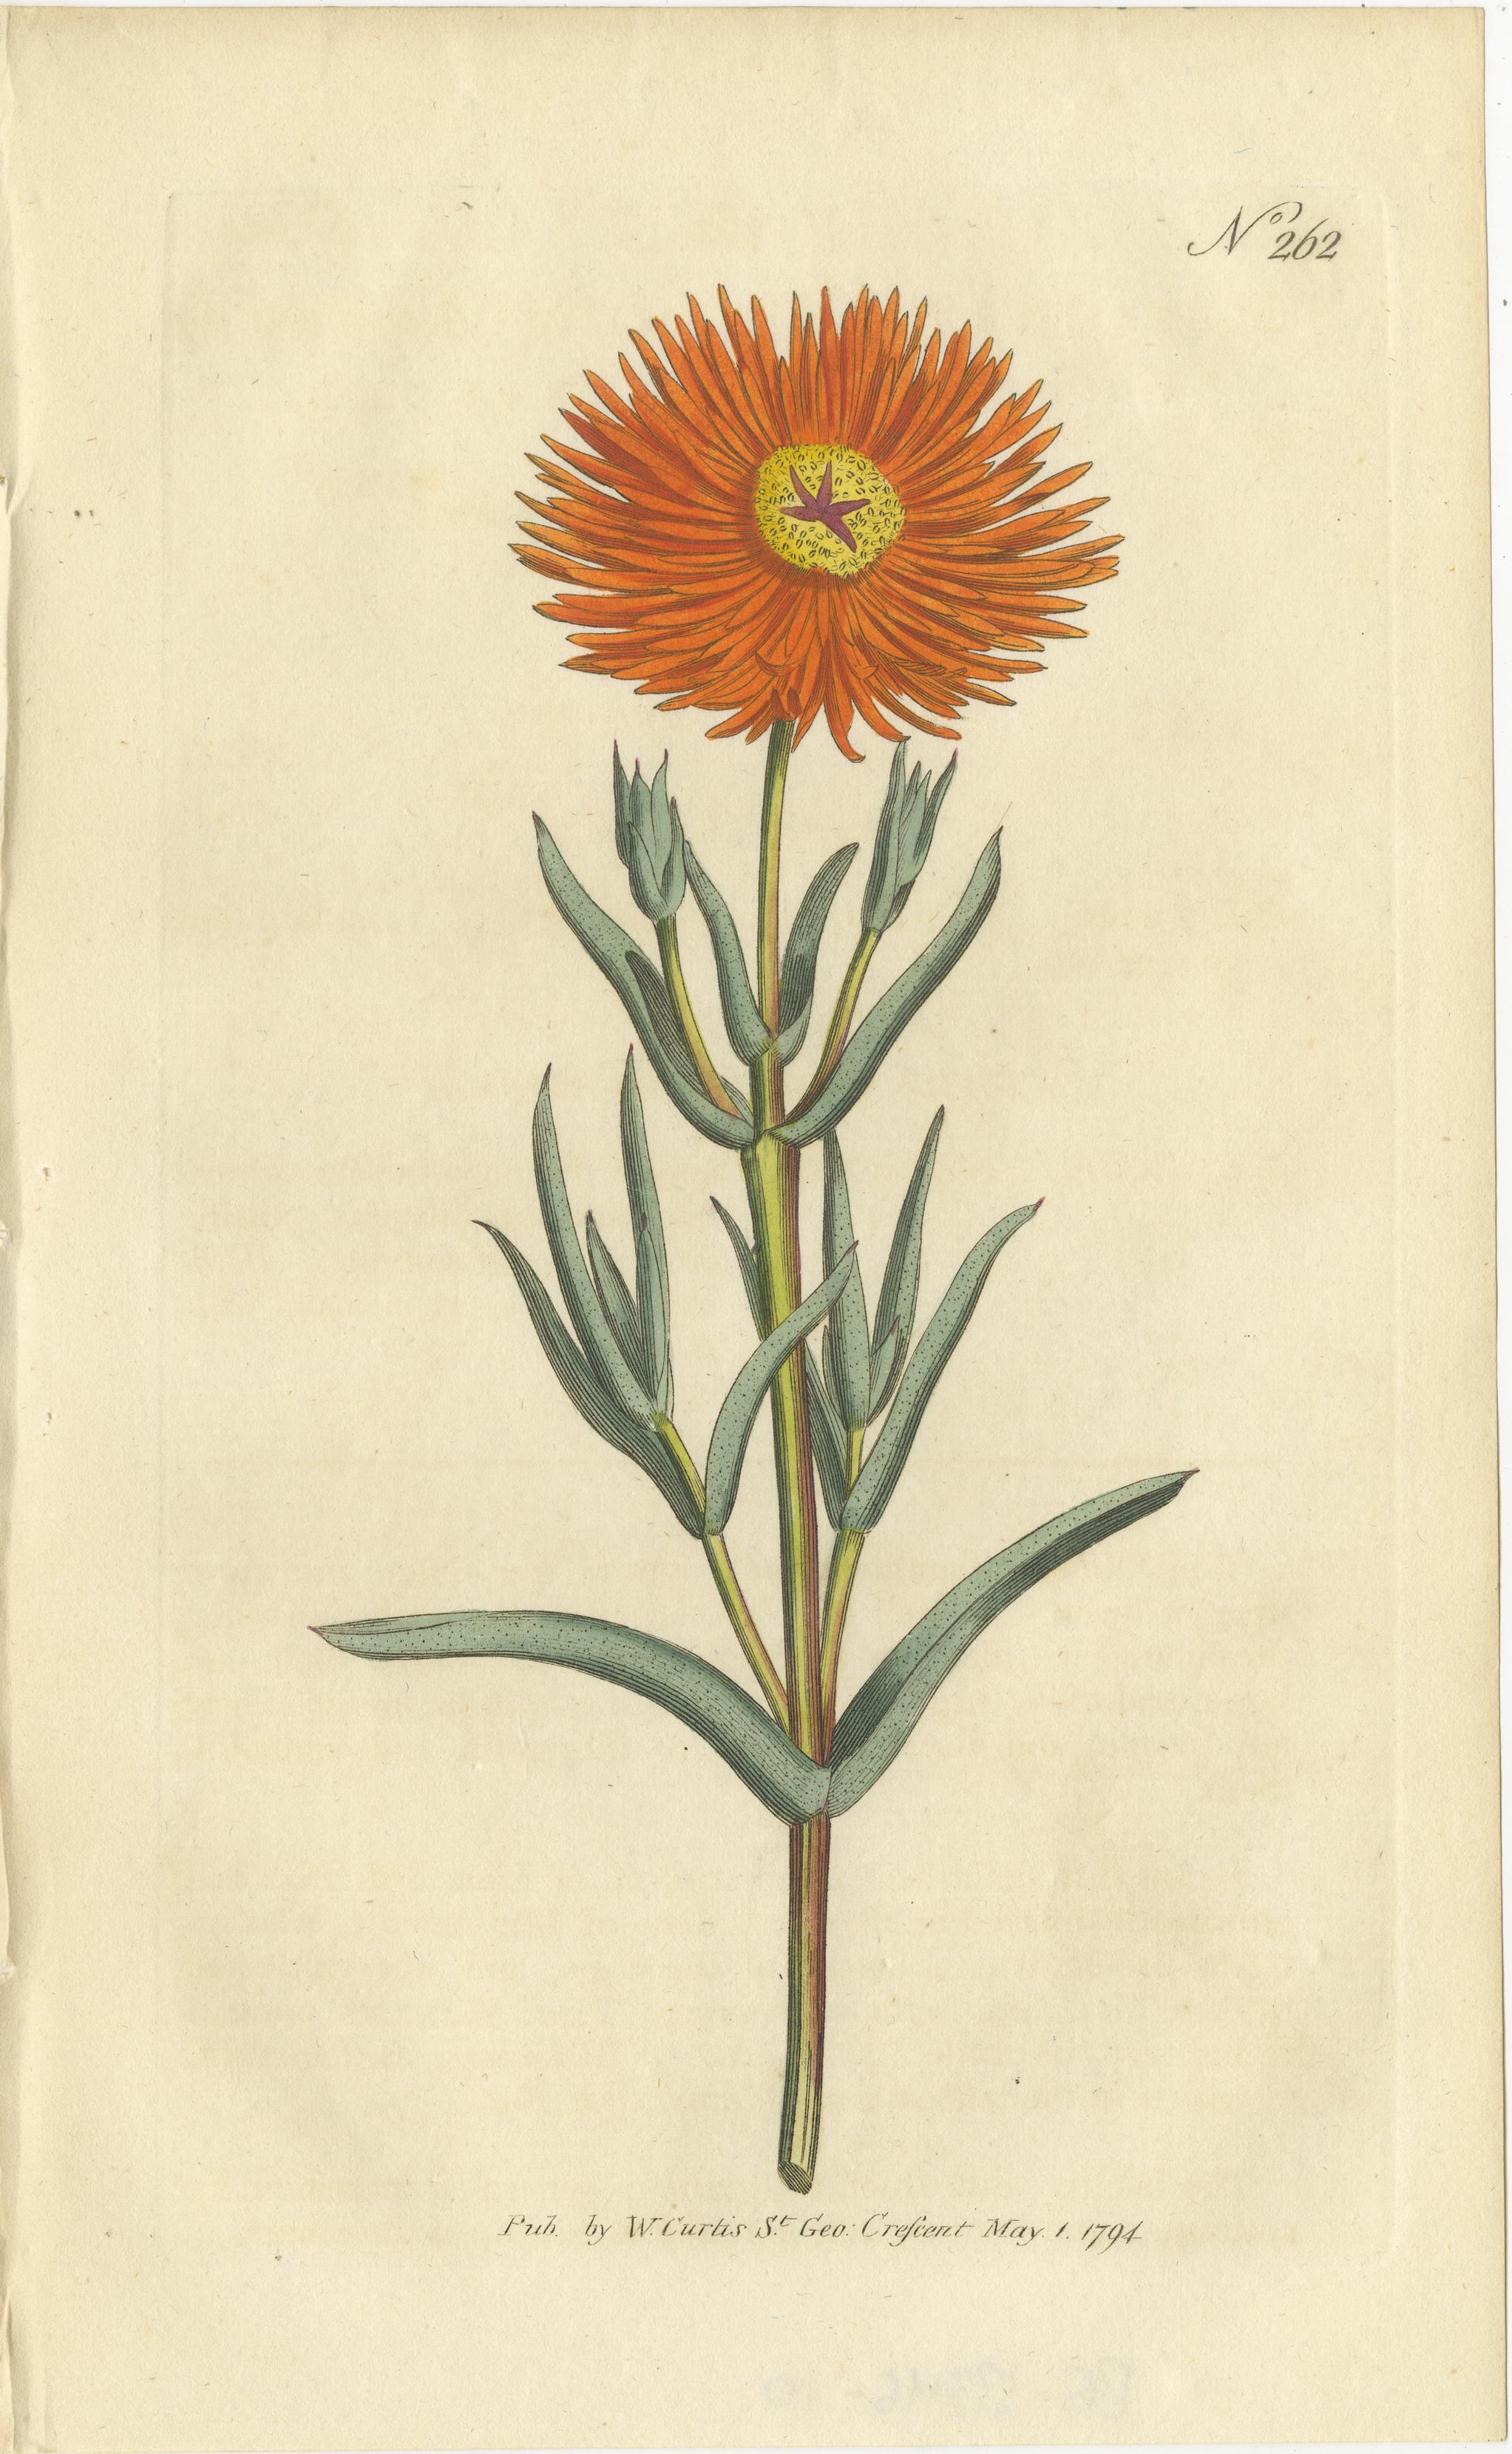 Antique botany print of the golden fig-marigold. This print originates from 'The Botanical Magazine; or Flower-Garden Displayed (..)' by William Curtis. Published 1794. 

The Botanical Magazine; or Flower-Garden Displayed, is an illustrated